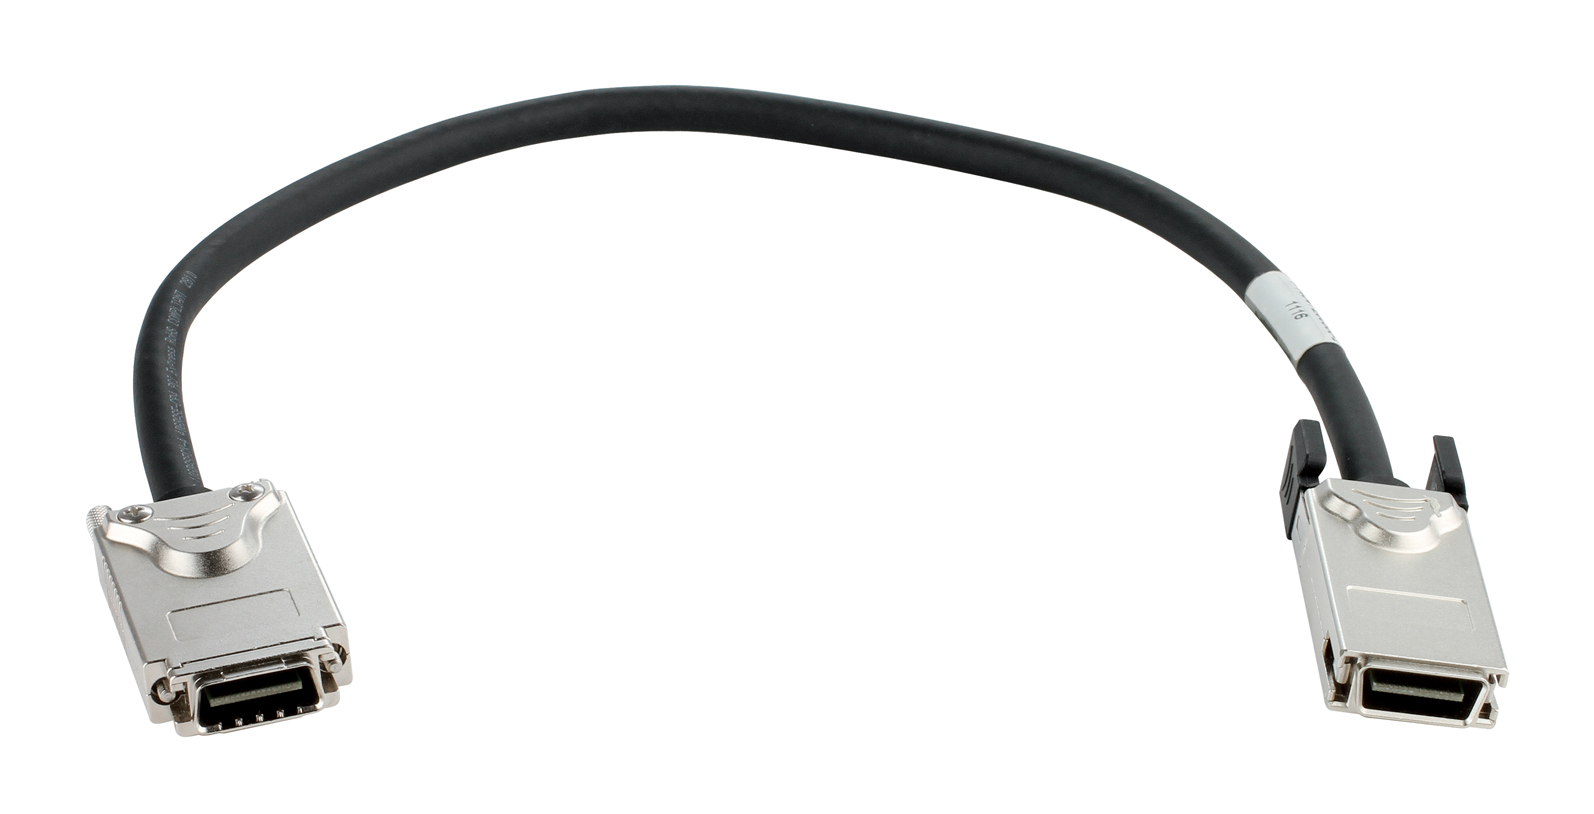 DEM-CB50ICX 50 cm Interconnect Cable for DGS-3120 series and DMC 